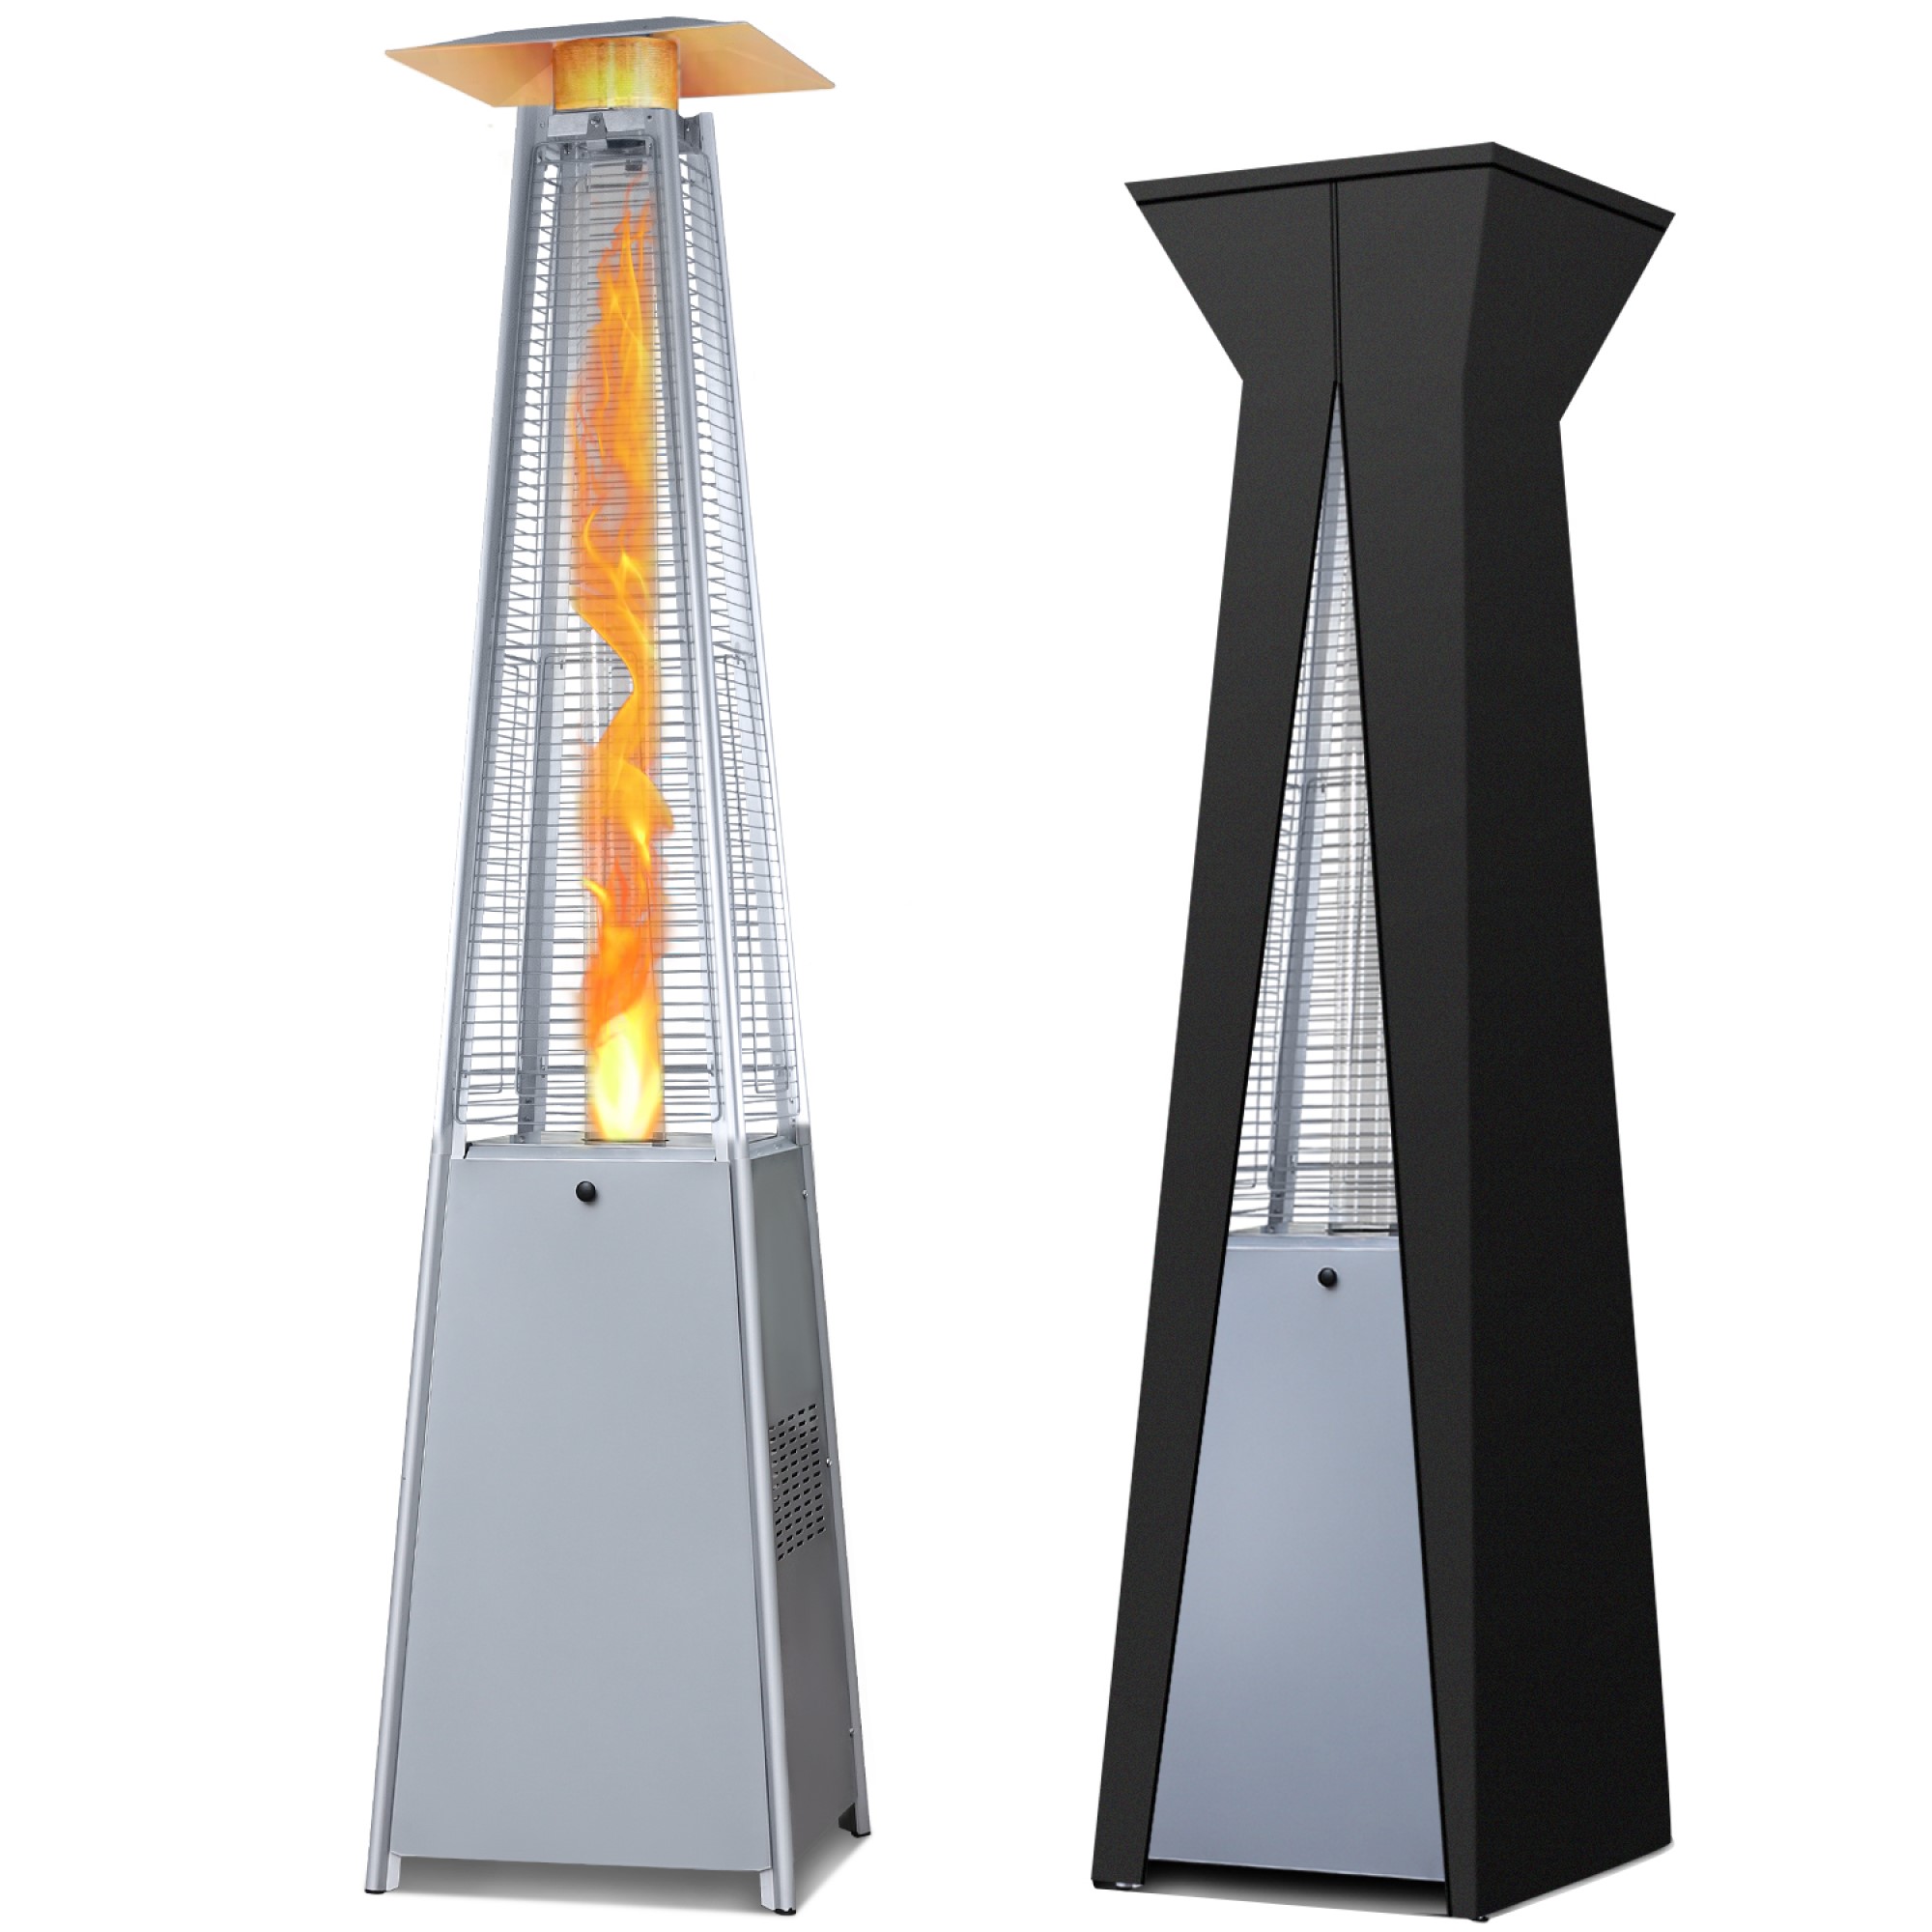 Patio Heater for Outdoor Commercial Use with Waterproof Cover,45000 Btu Pyramid Outside Propane Gas Heater for Party,Backyard or Garden Decorations (1 PC, Silver)-Boyel Living